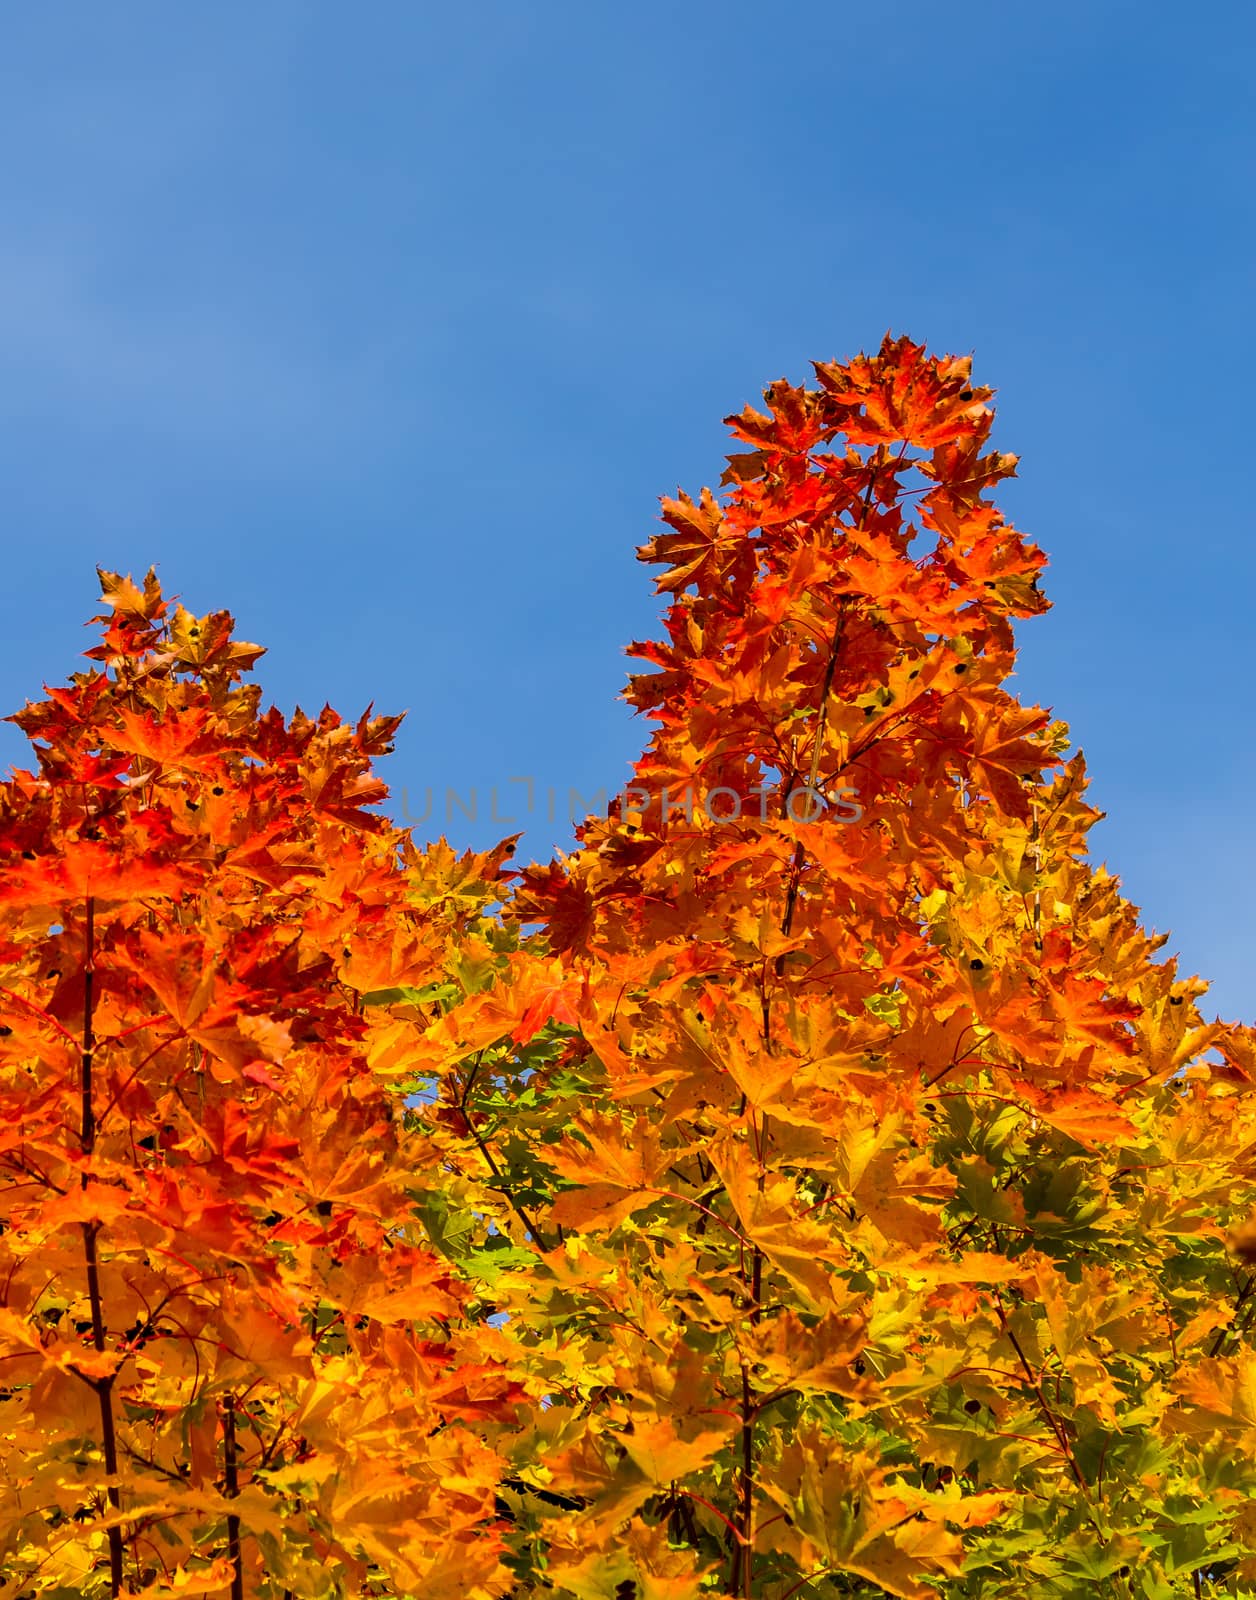 All the autumns colors in maple leafs against the blue sky portrait